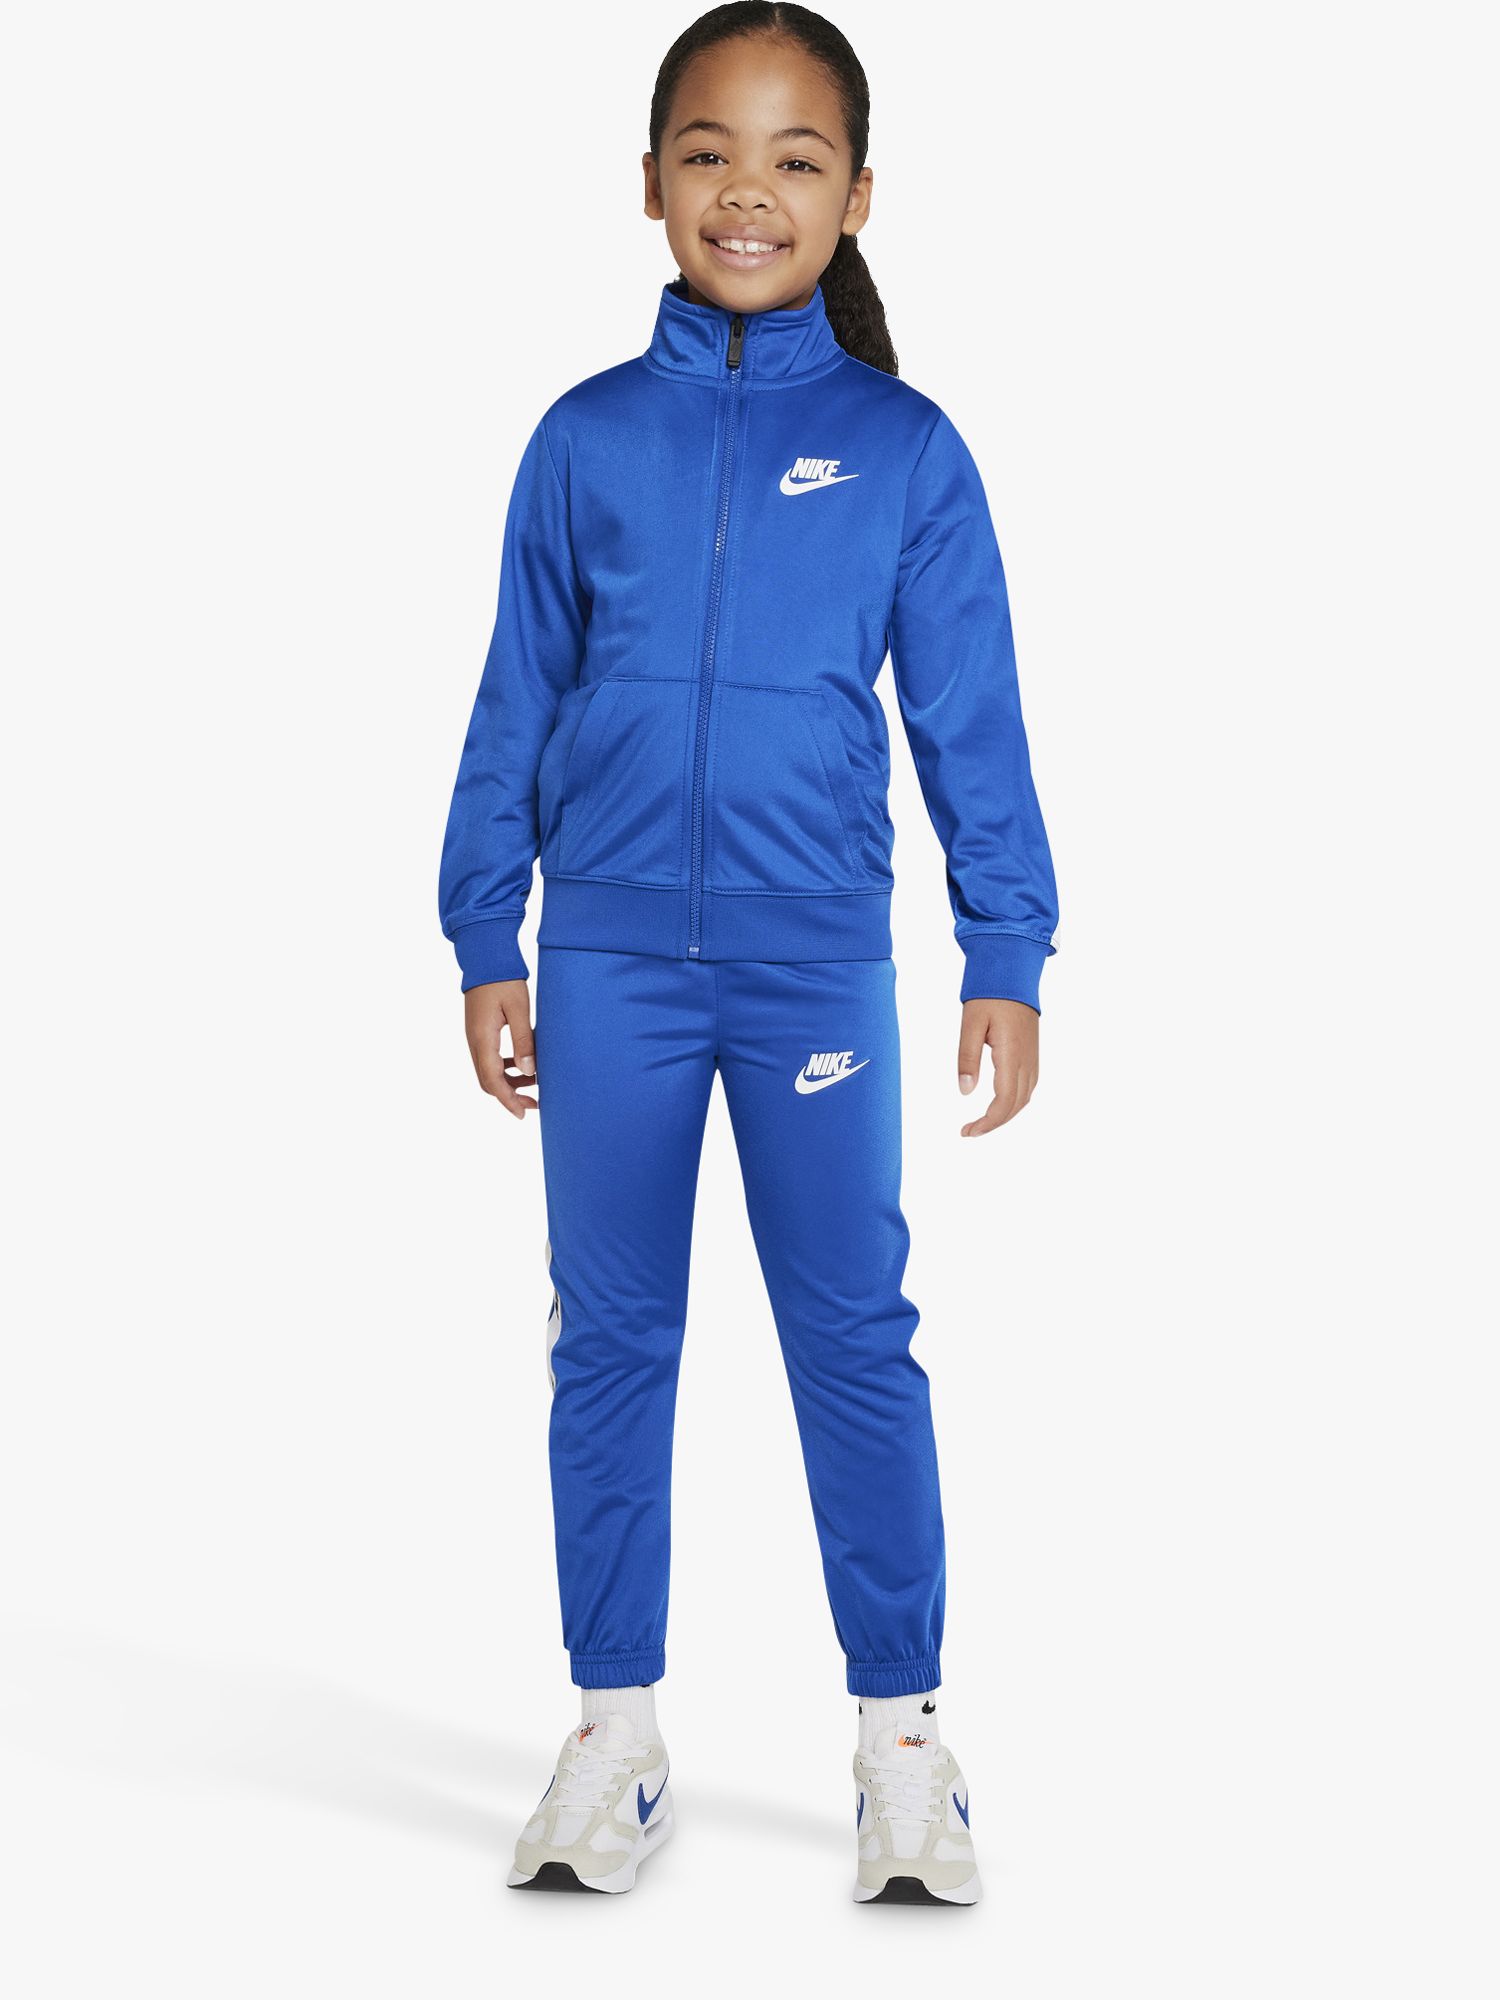 Encommium Australische persoon Betsy Trotwood Nike Kids' Tape Logo Jacket & Joggers Tracksuit, Royal Blue, 2-3 years